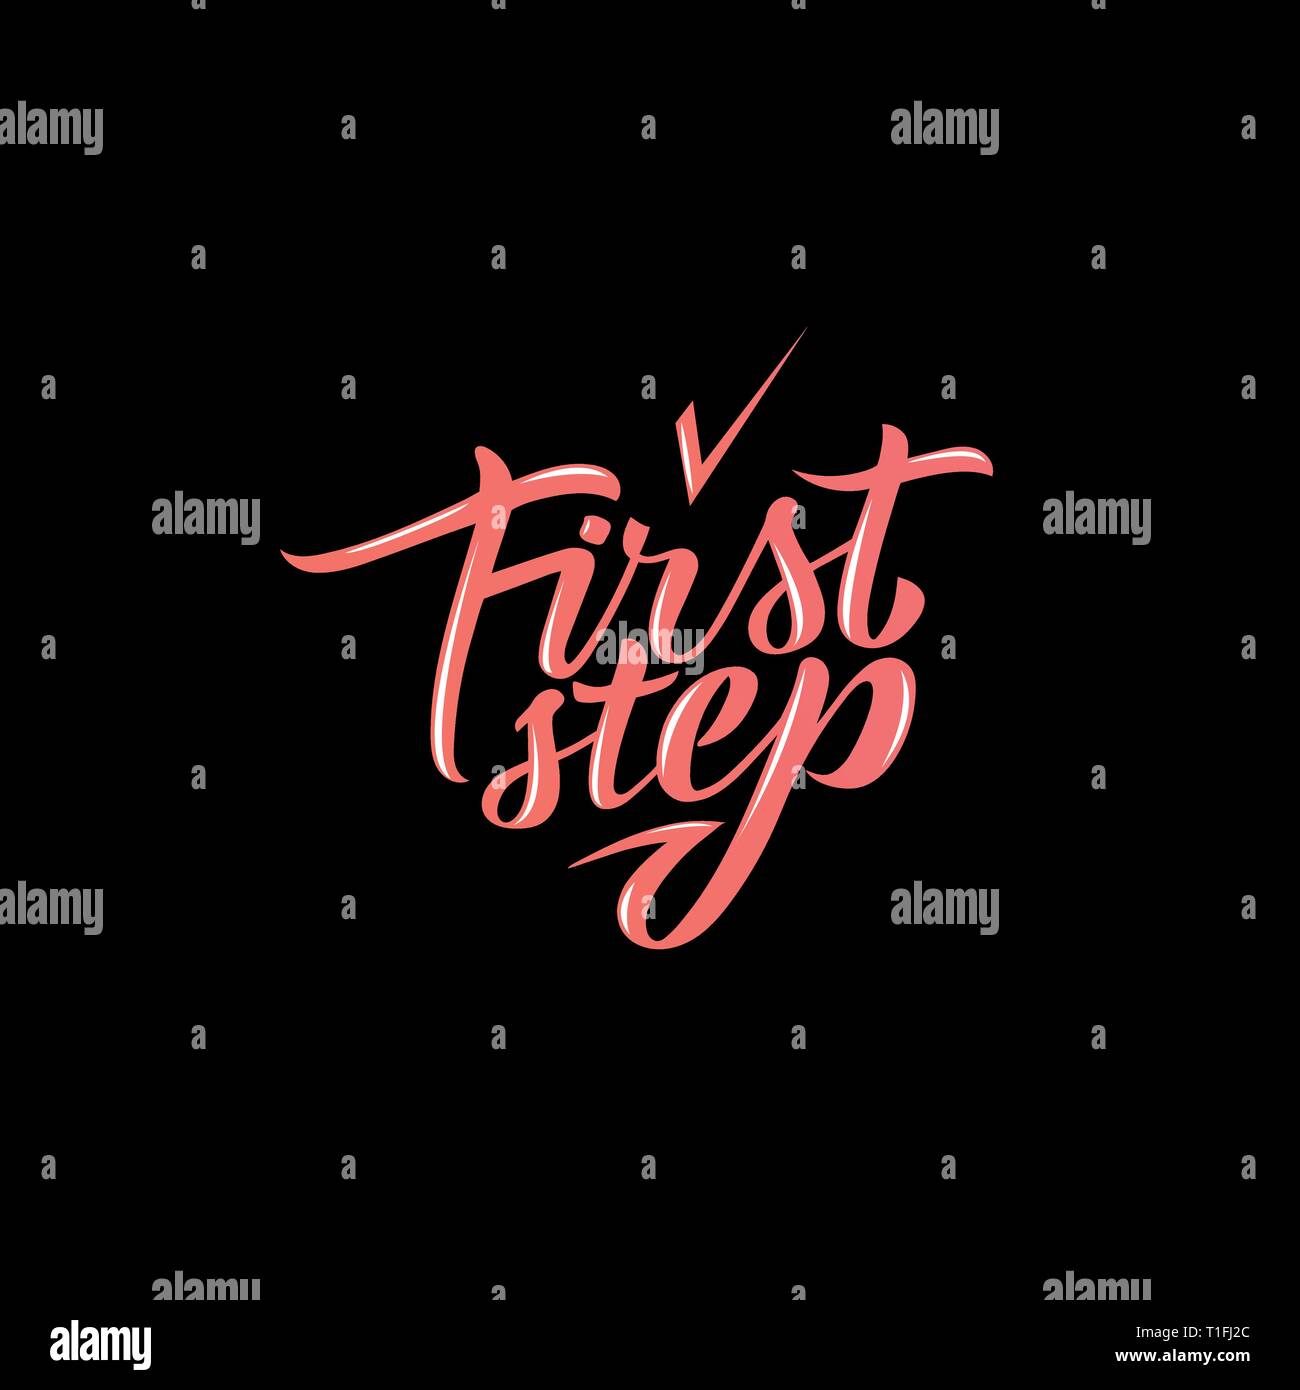 First step. Vector illustration with handwritten phrase. Lettering Stock Vector